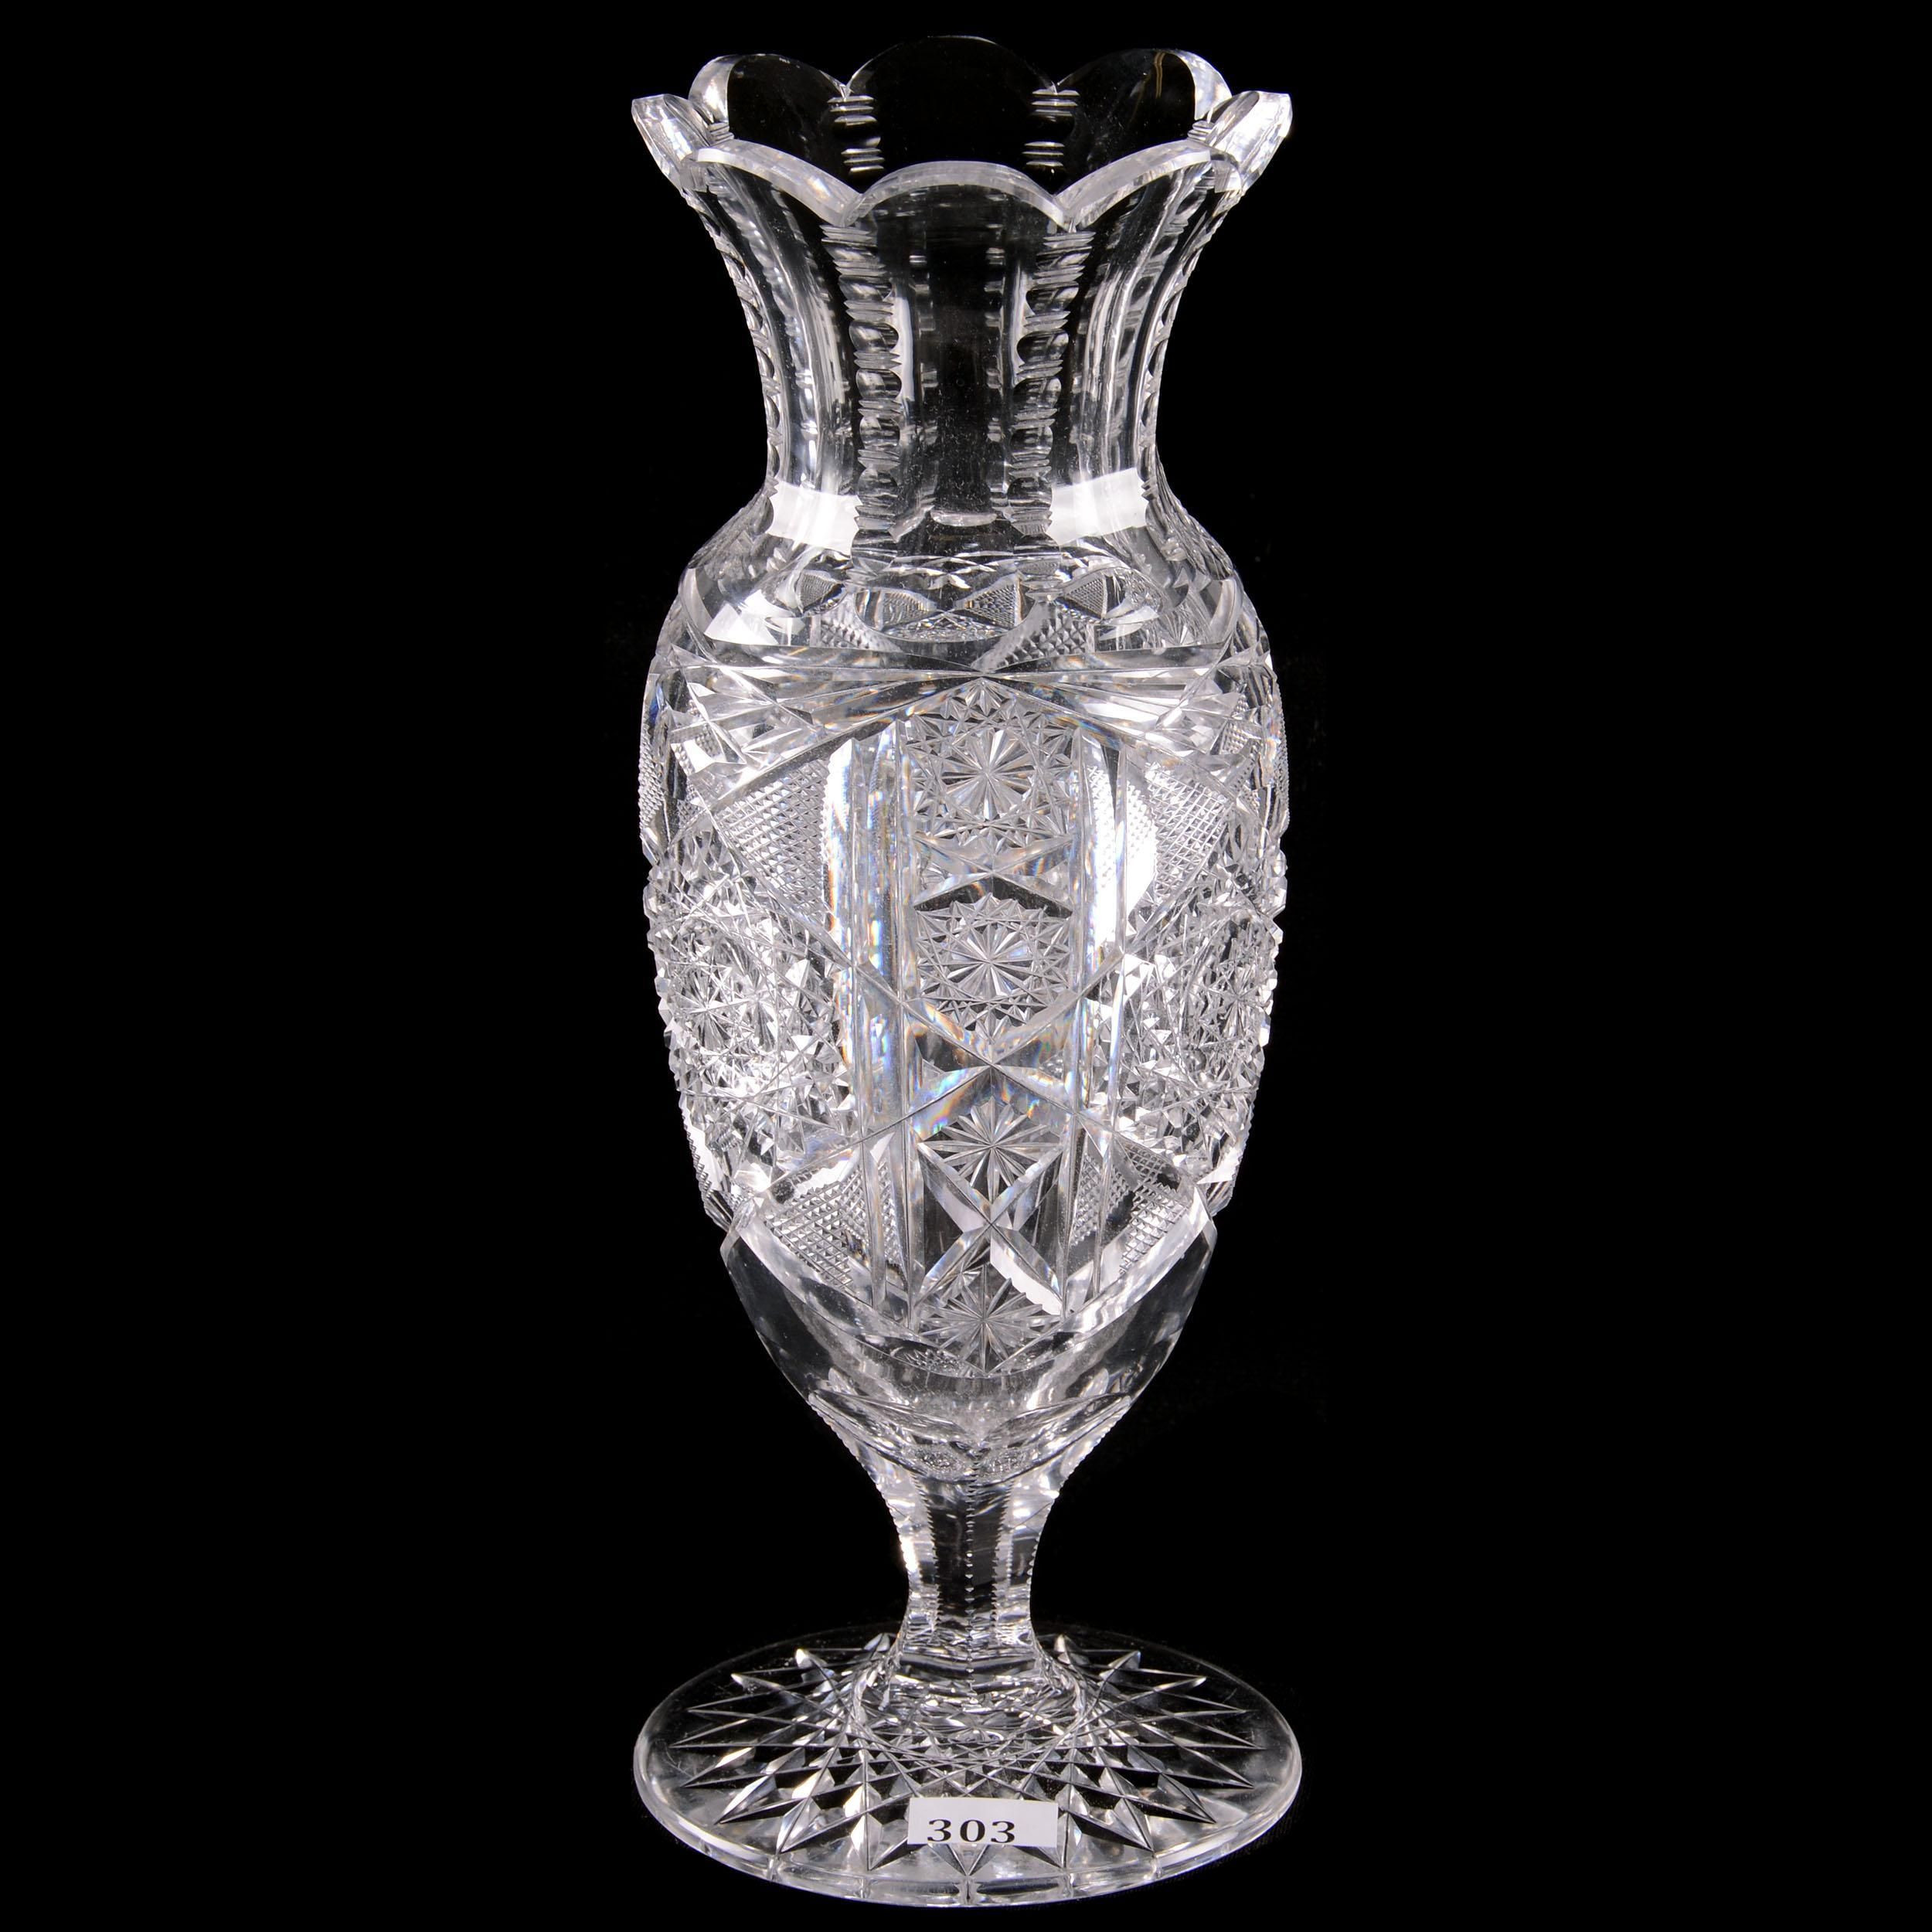 23 Lovely Footed Crystal Vase 2024 free download footed crystal vase of american brilliant period cut glass footed vase 11 75 genoa inside american brilliant period cut glass footed vase 11 75 genoa pattern by clark